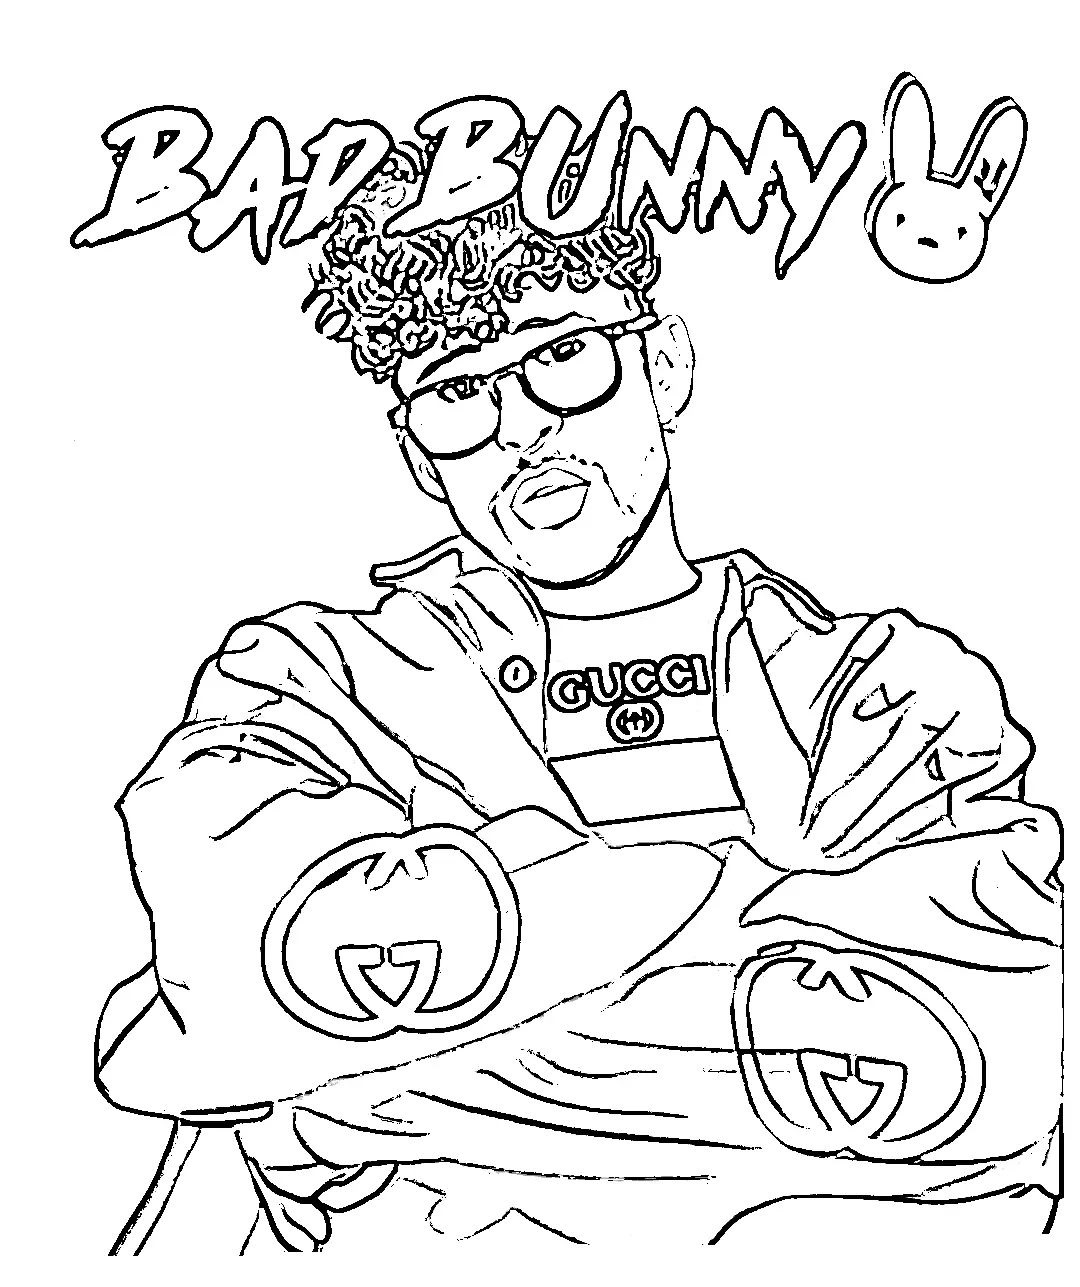 Bad Bunny Coloring Pages Printable Pdf - BadBunny Rapper Singer Coloring Pages